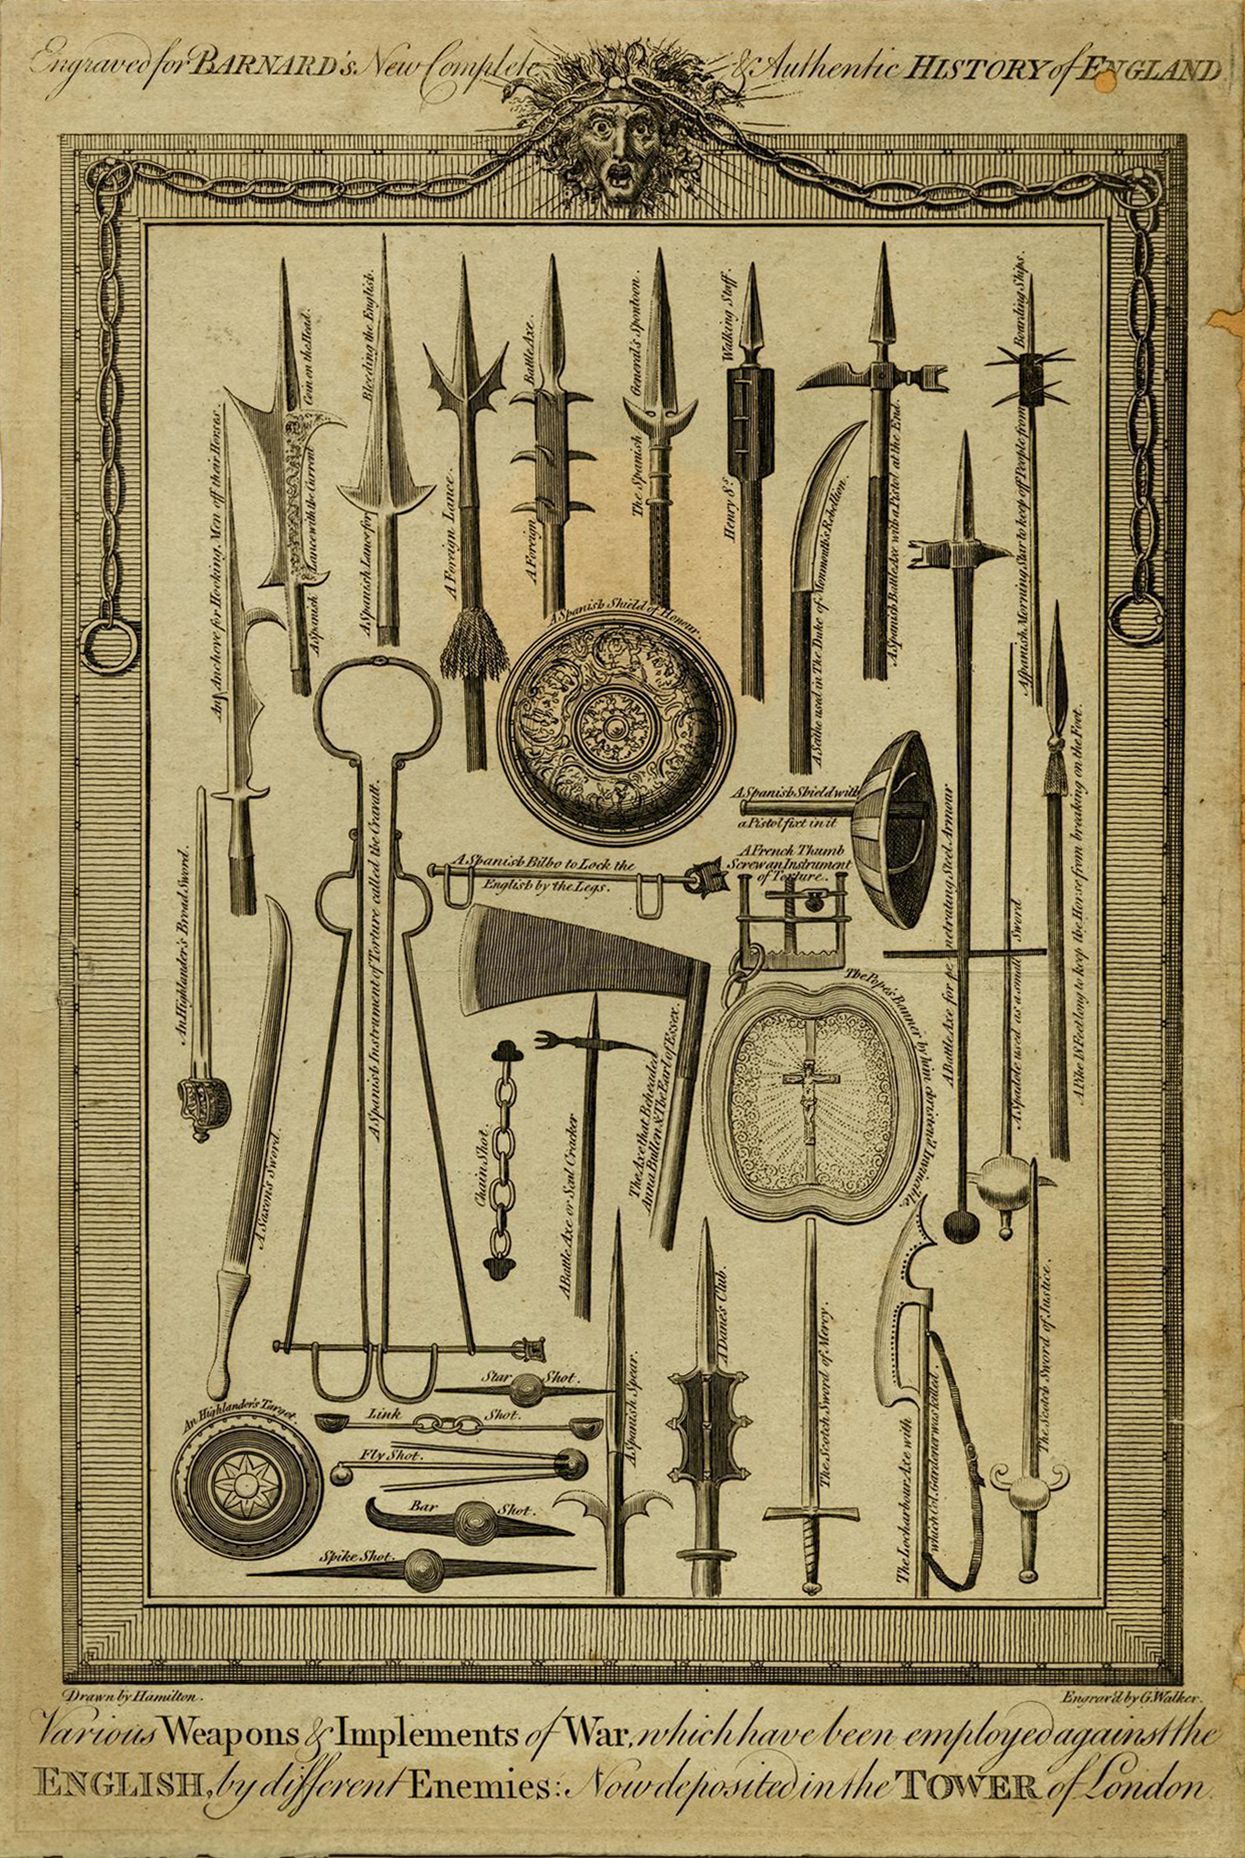 collection of armour and weapons from the Spanish Armoury drawn and arranged within a frame